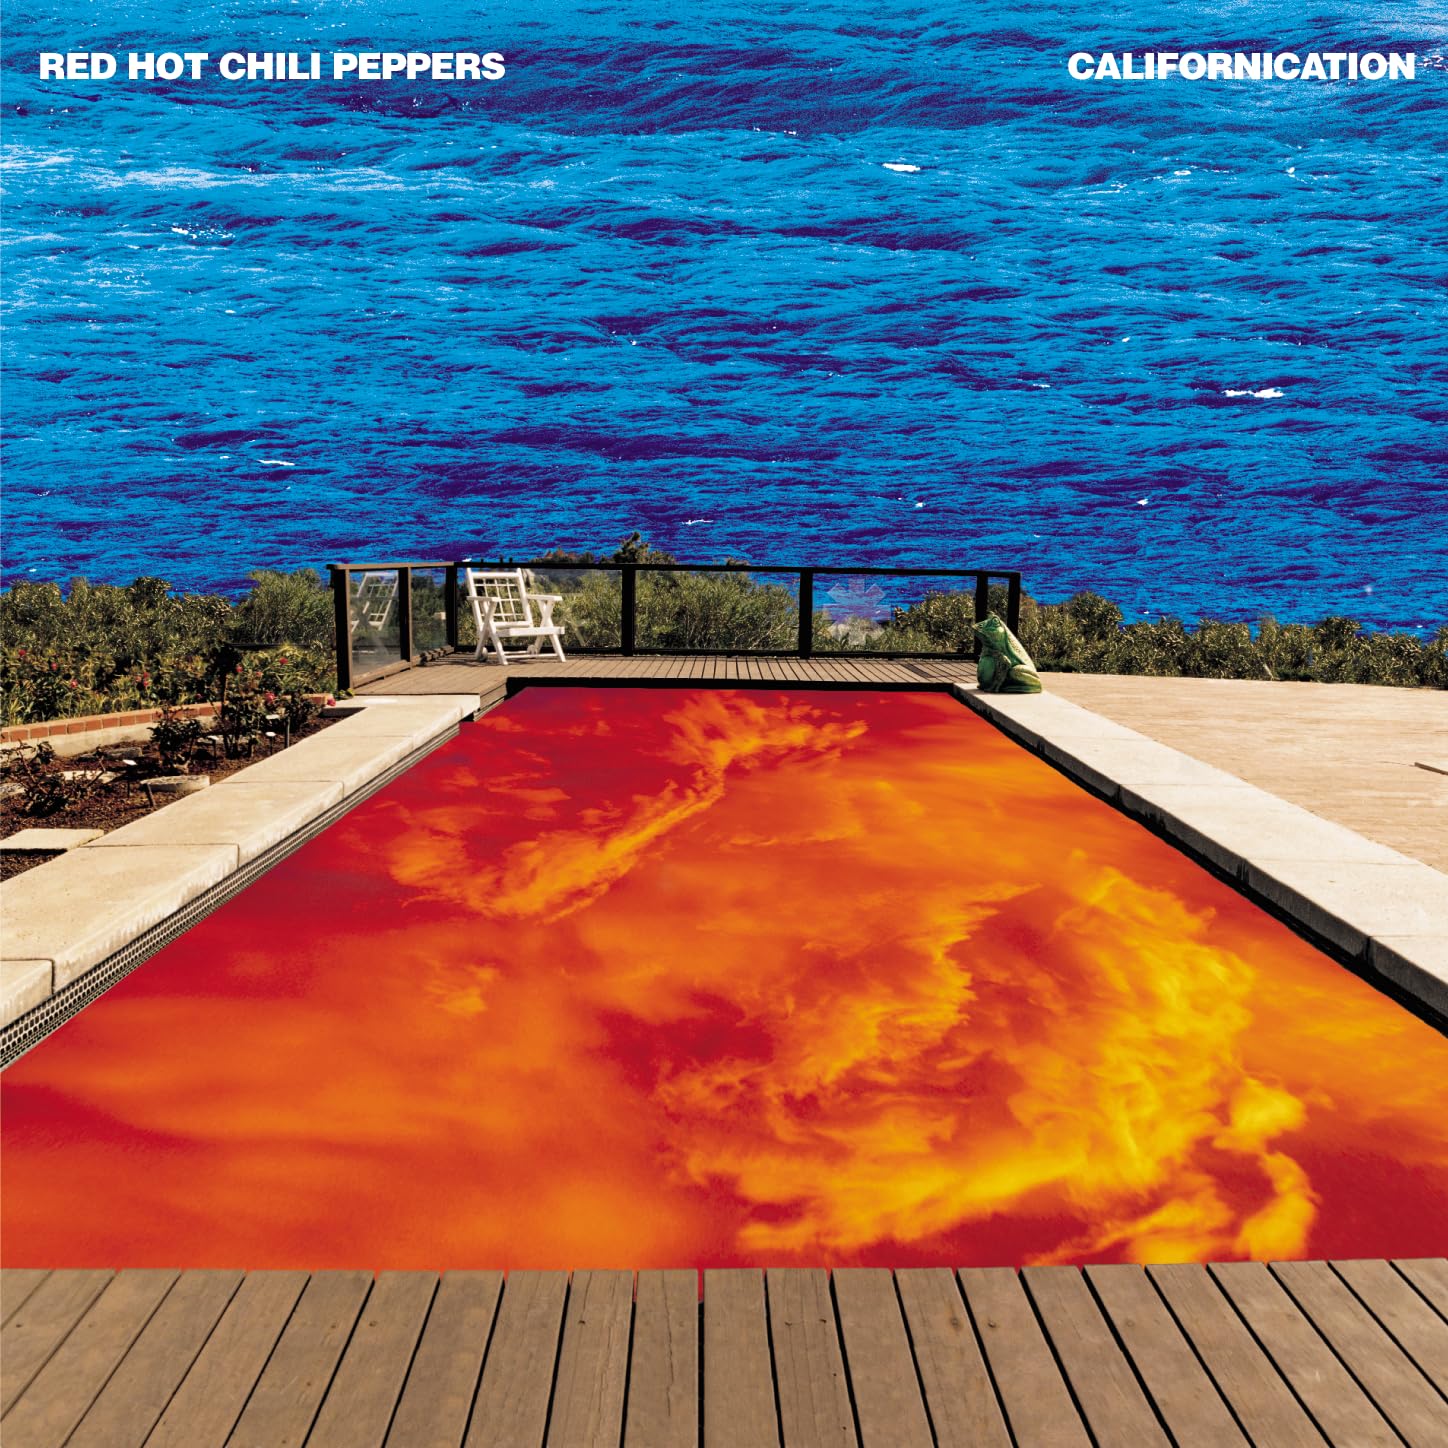 Red Hot Chili Peppers – Californication (2LP Red & Ocean Blue Vinyl)